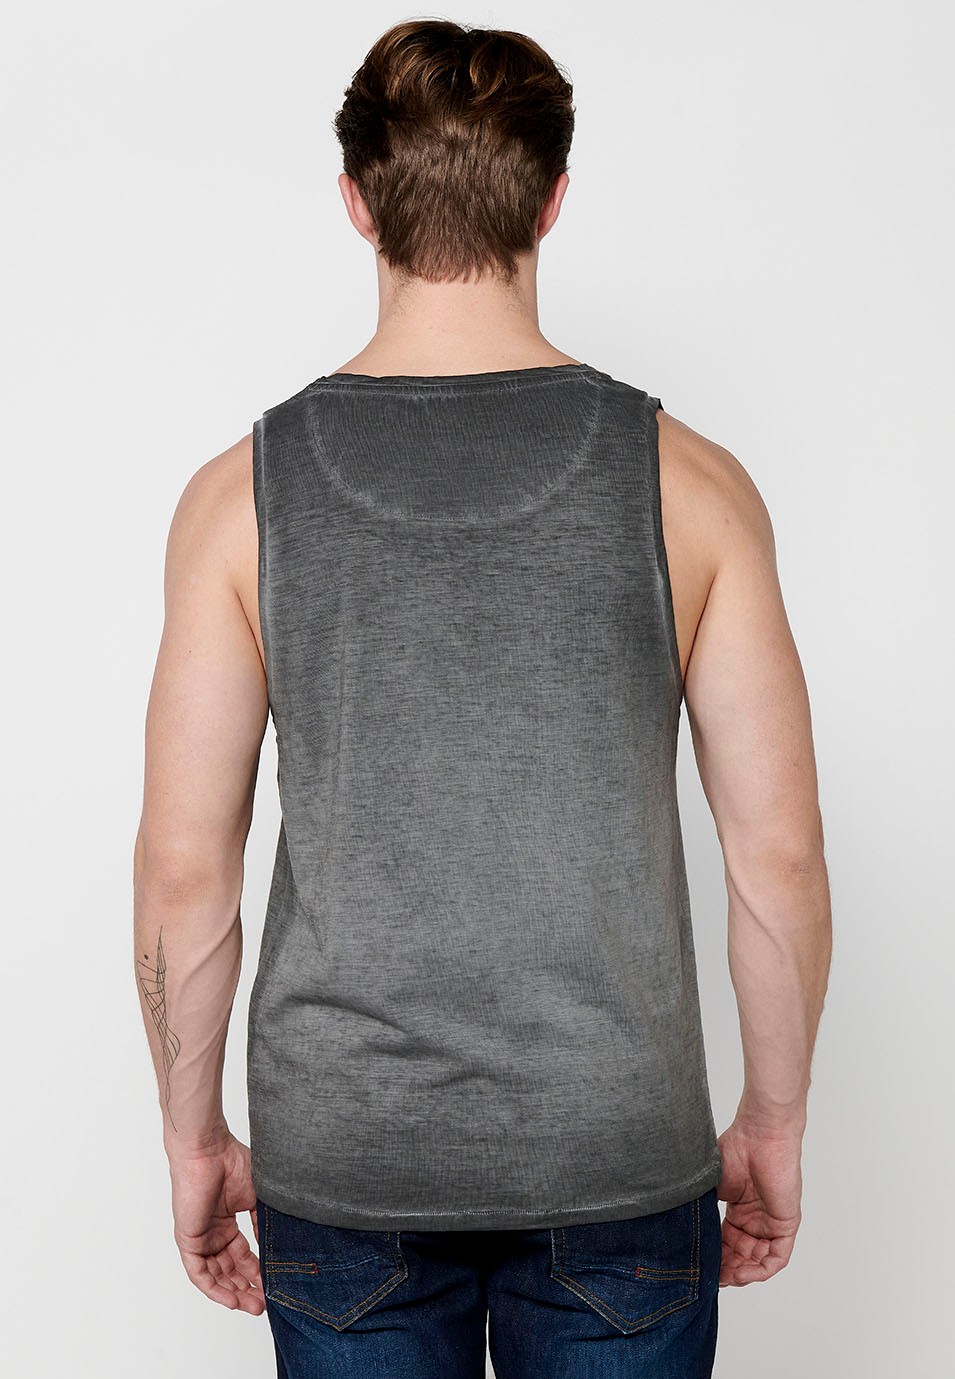 Cotton tank top, with front print, gray color for men